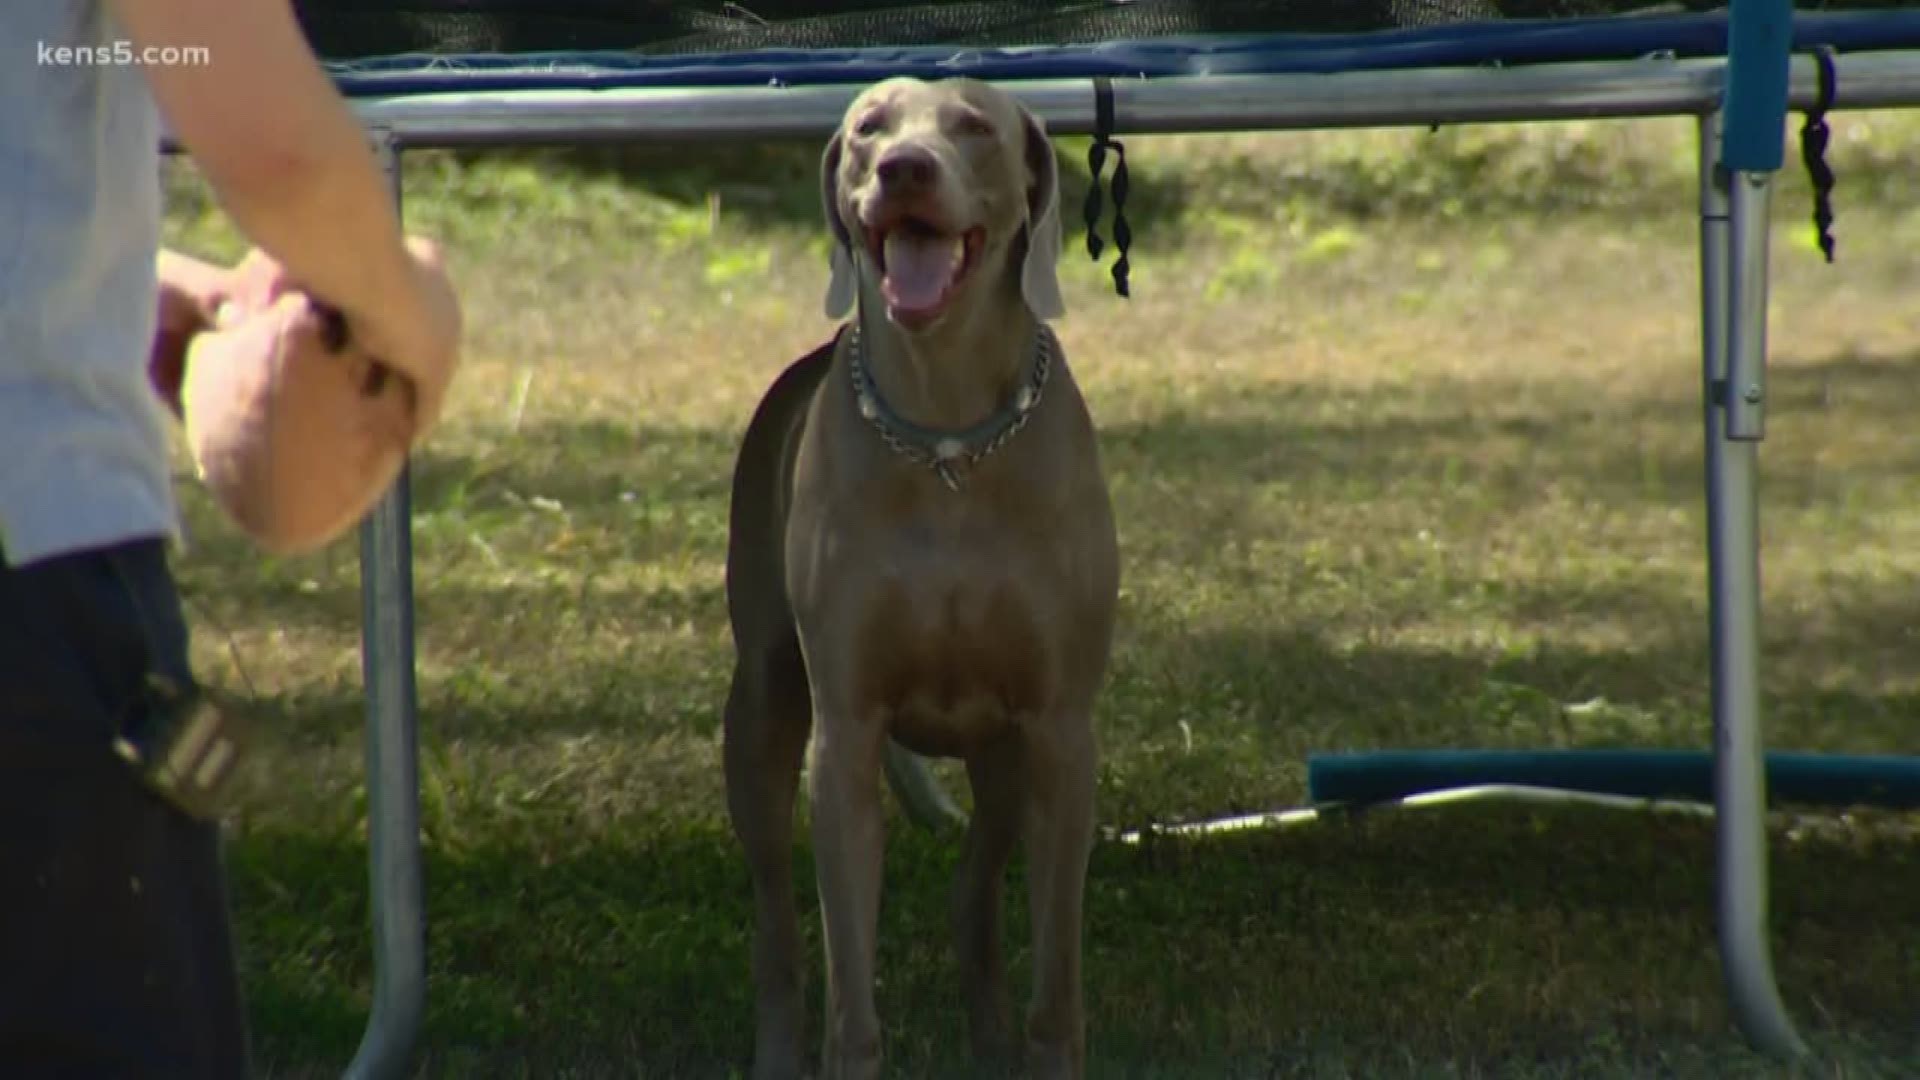 A Houston man is thankful to the Leon Valley community for finding and saving his lost dog.